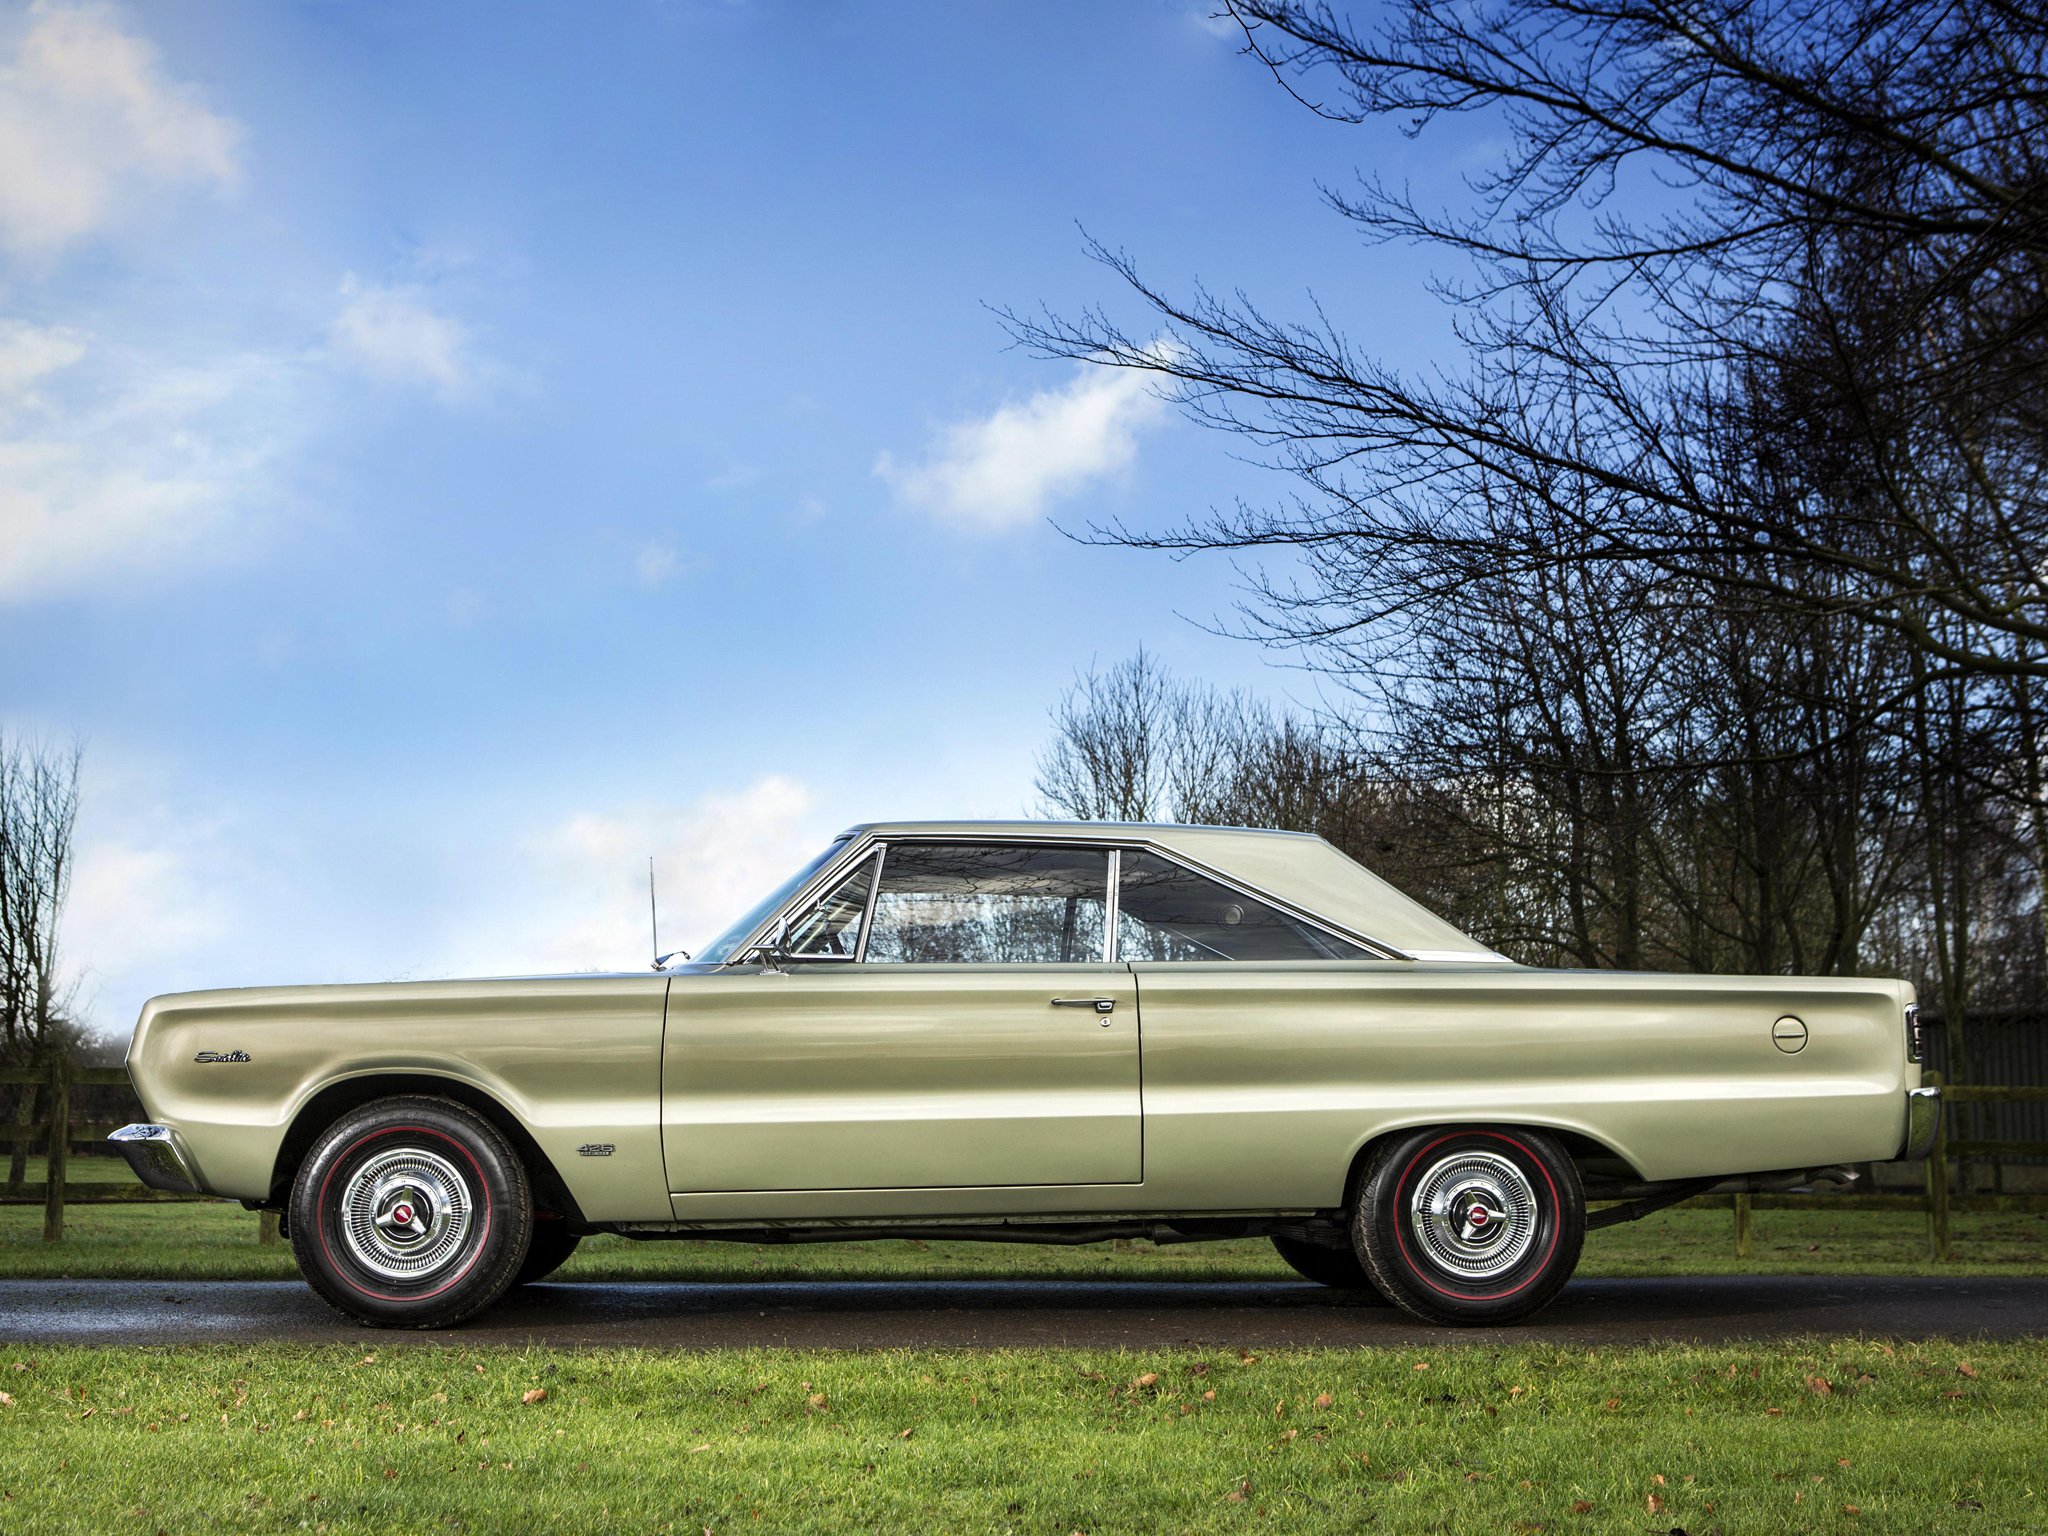 1966, Plymouth, Belvedere, Satellite, 426, Hemi, Hardtop, Coupe,  rp23 , Muscle, Classic Wallpaper